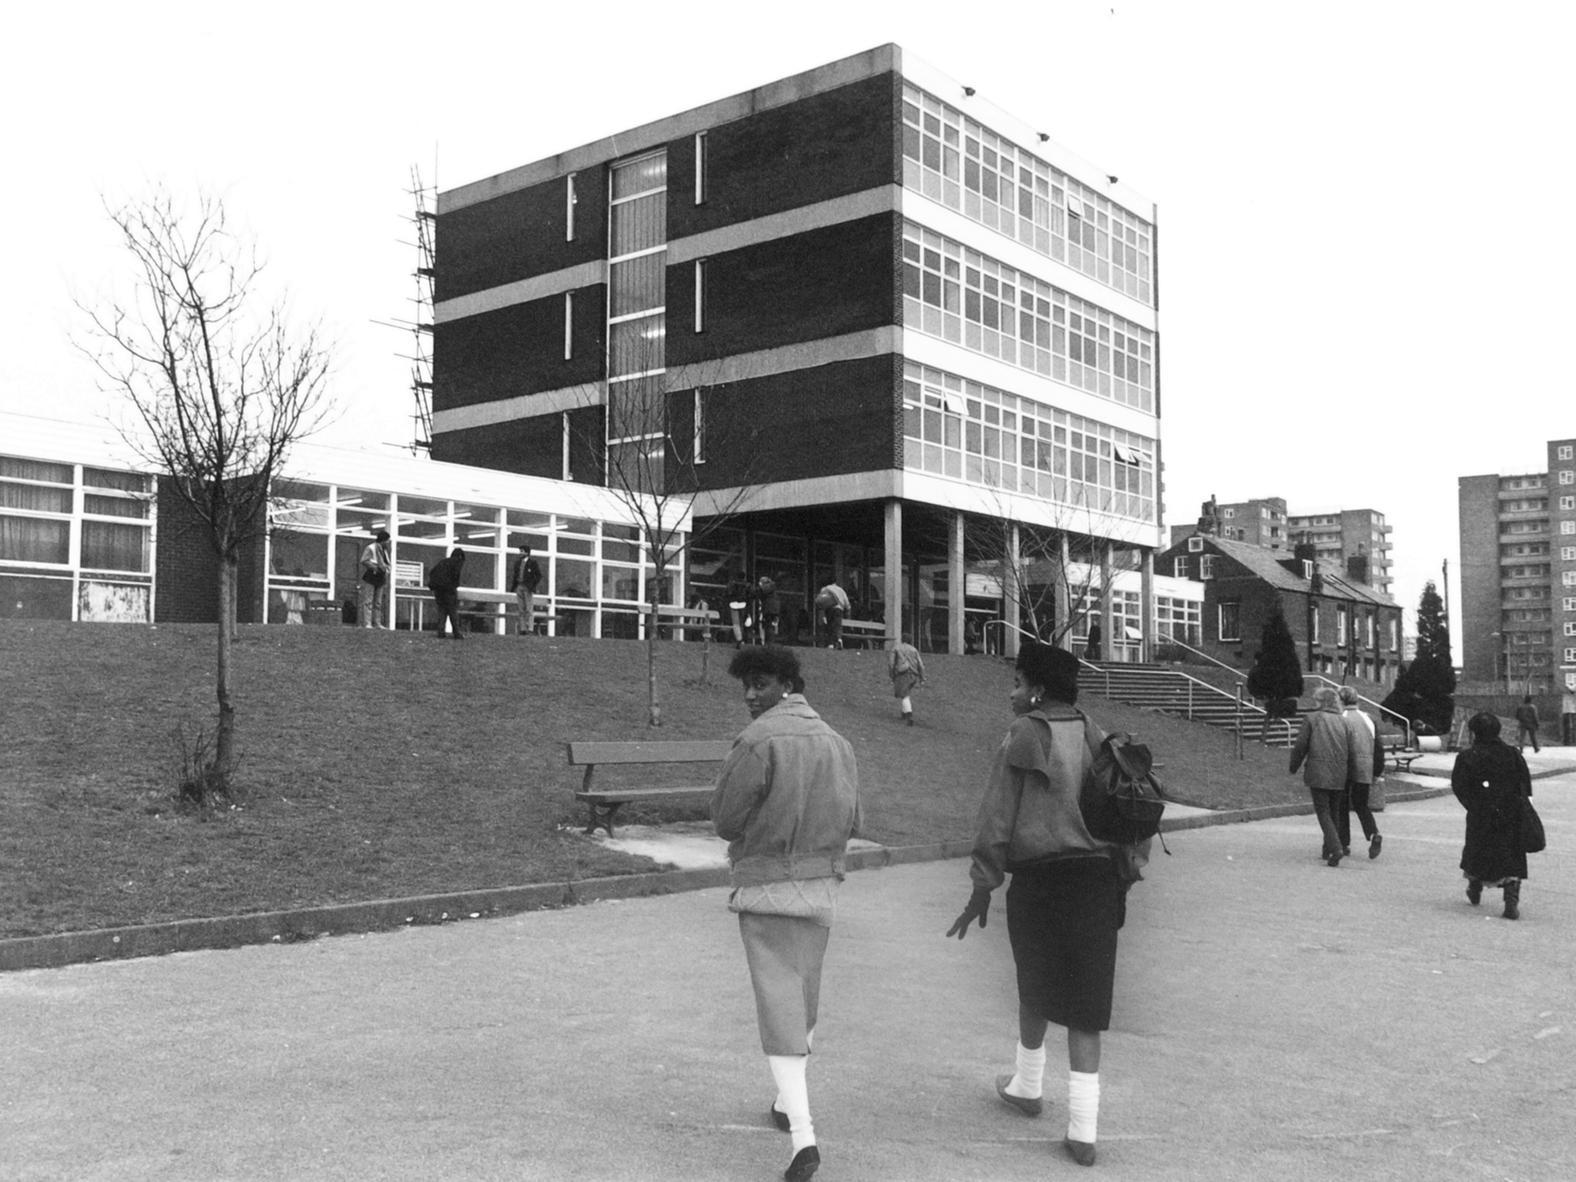 This is Primrose Hill High School which was under the threat of closure.